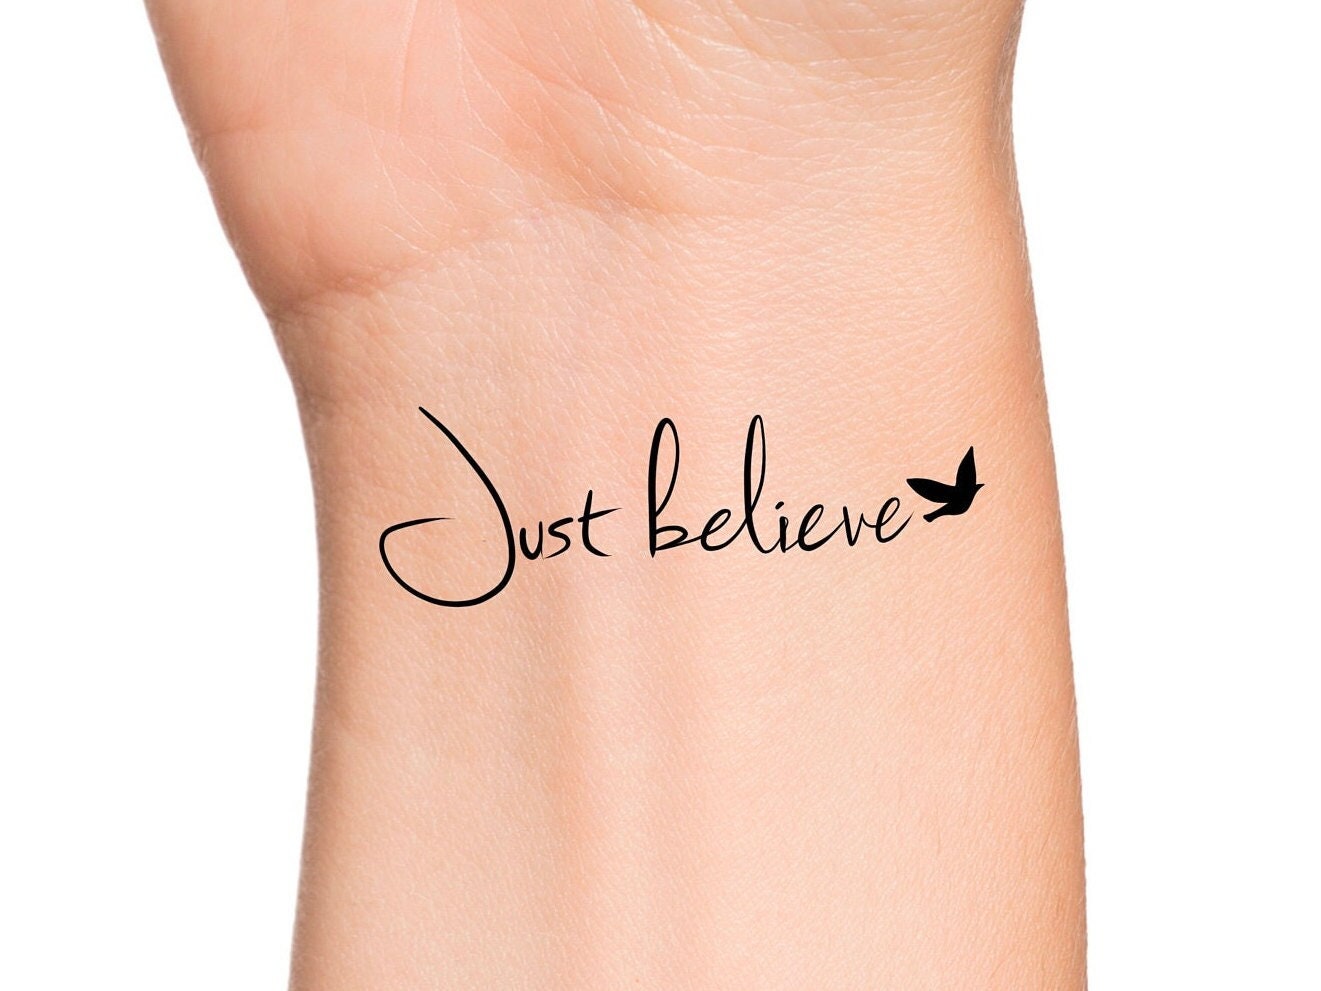 Share 70+ believe tattoo designs latest - in.cdgdbentre